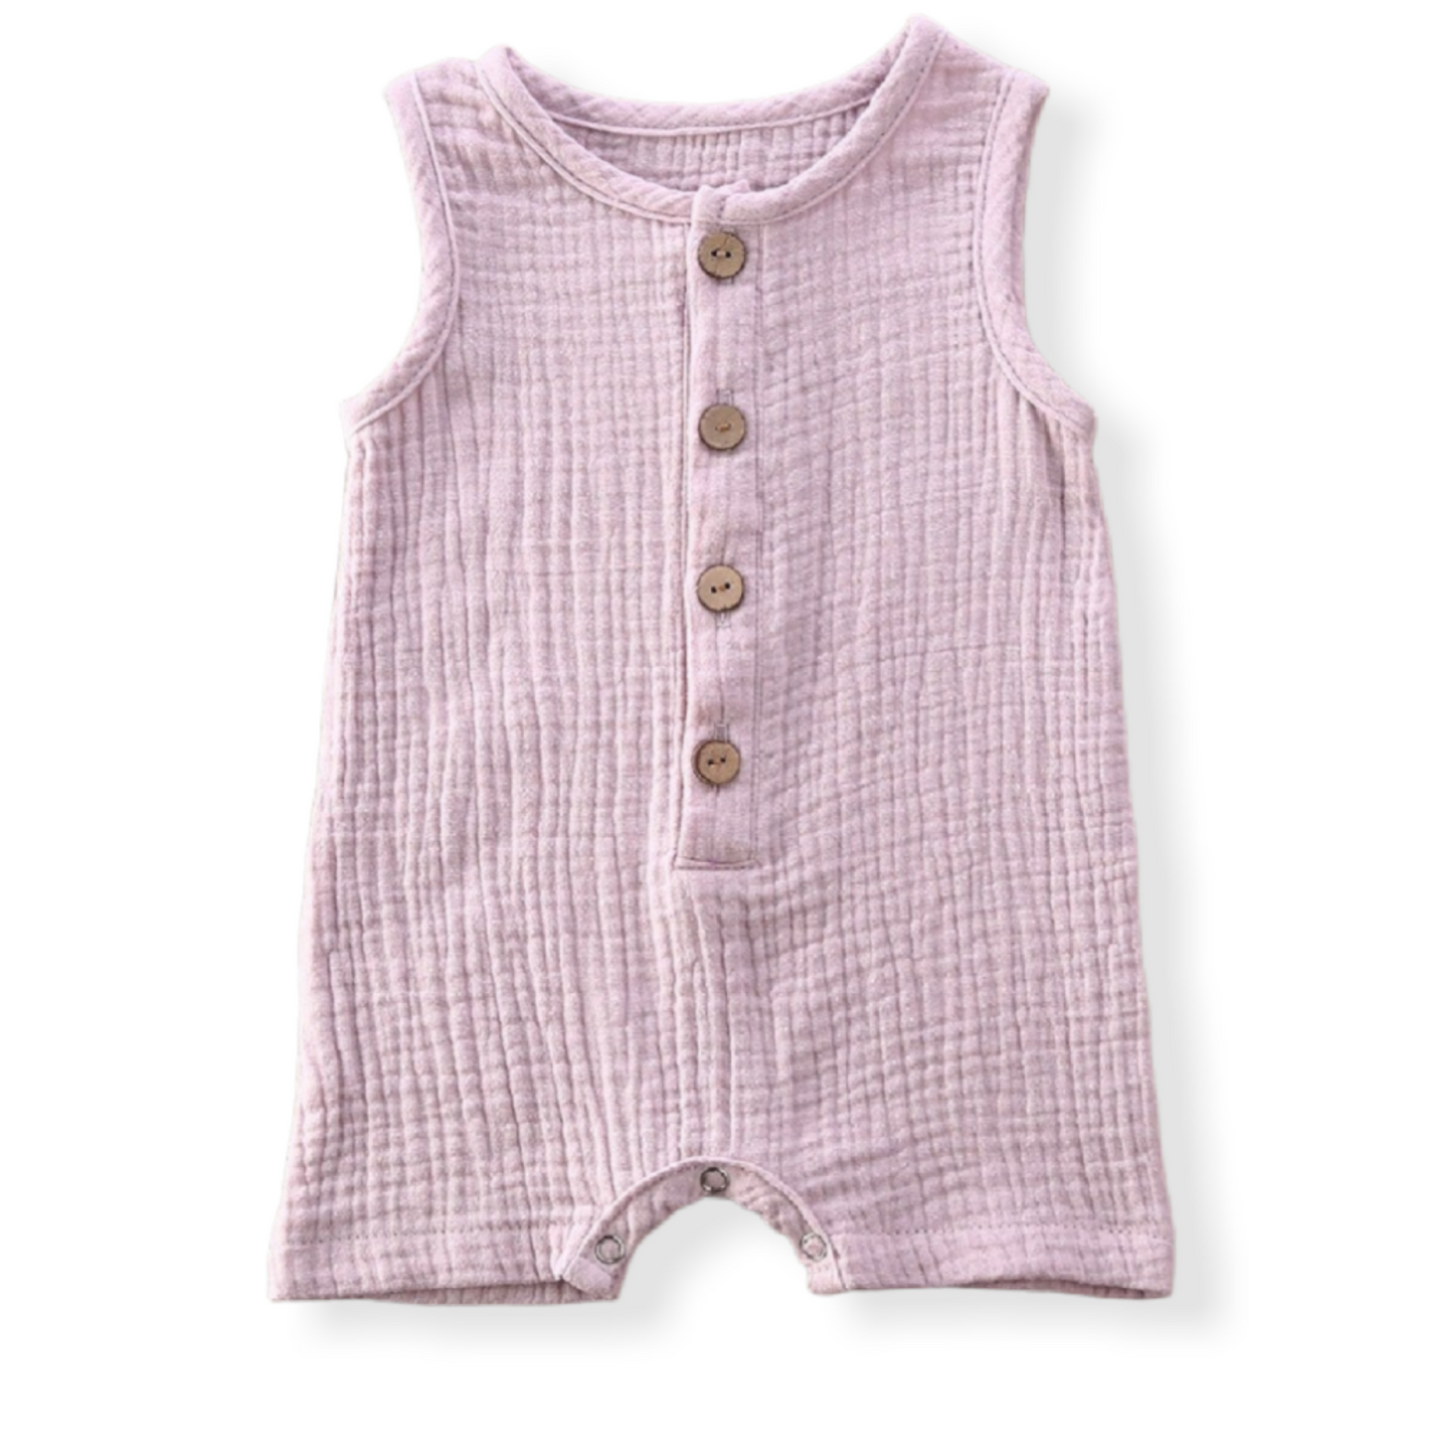 Lilac cotton baby romper for summer with buttons on the front and bottom- Hunny Bubba Kids